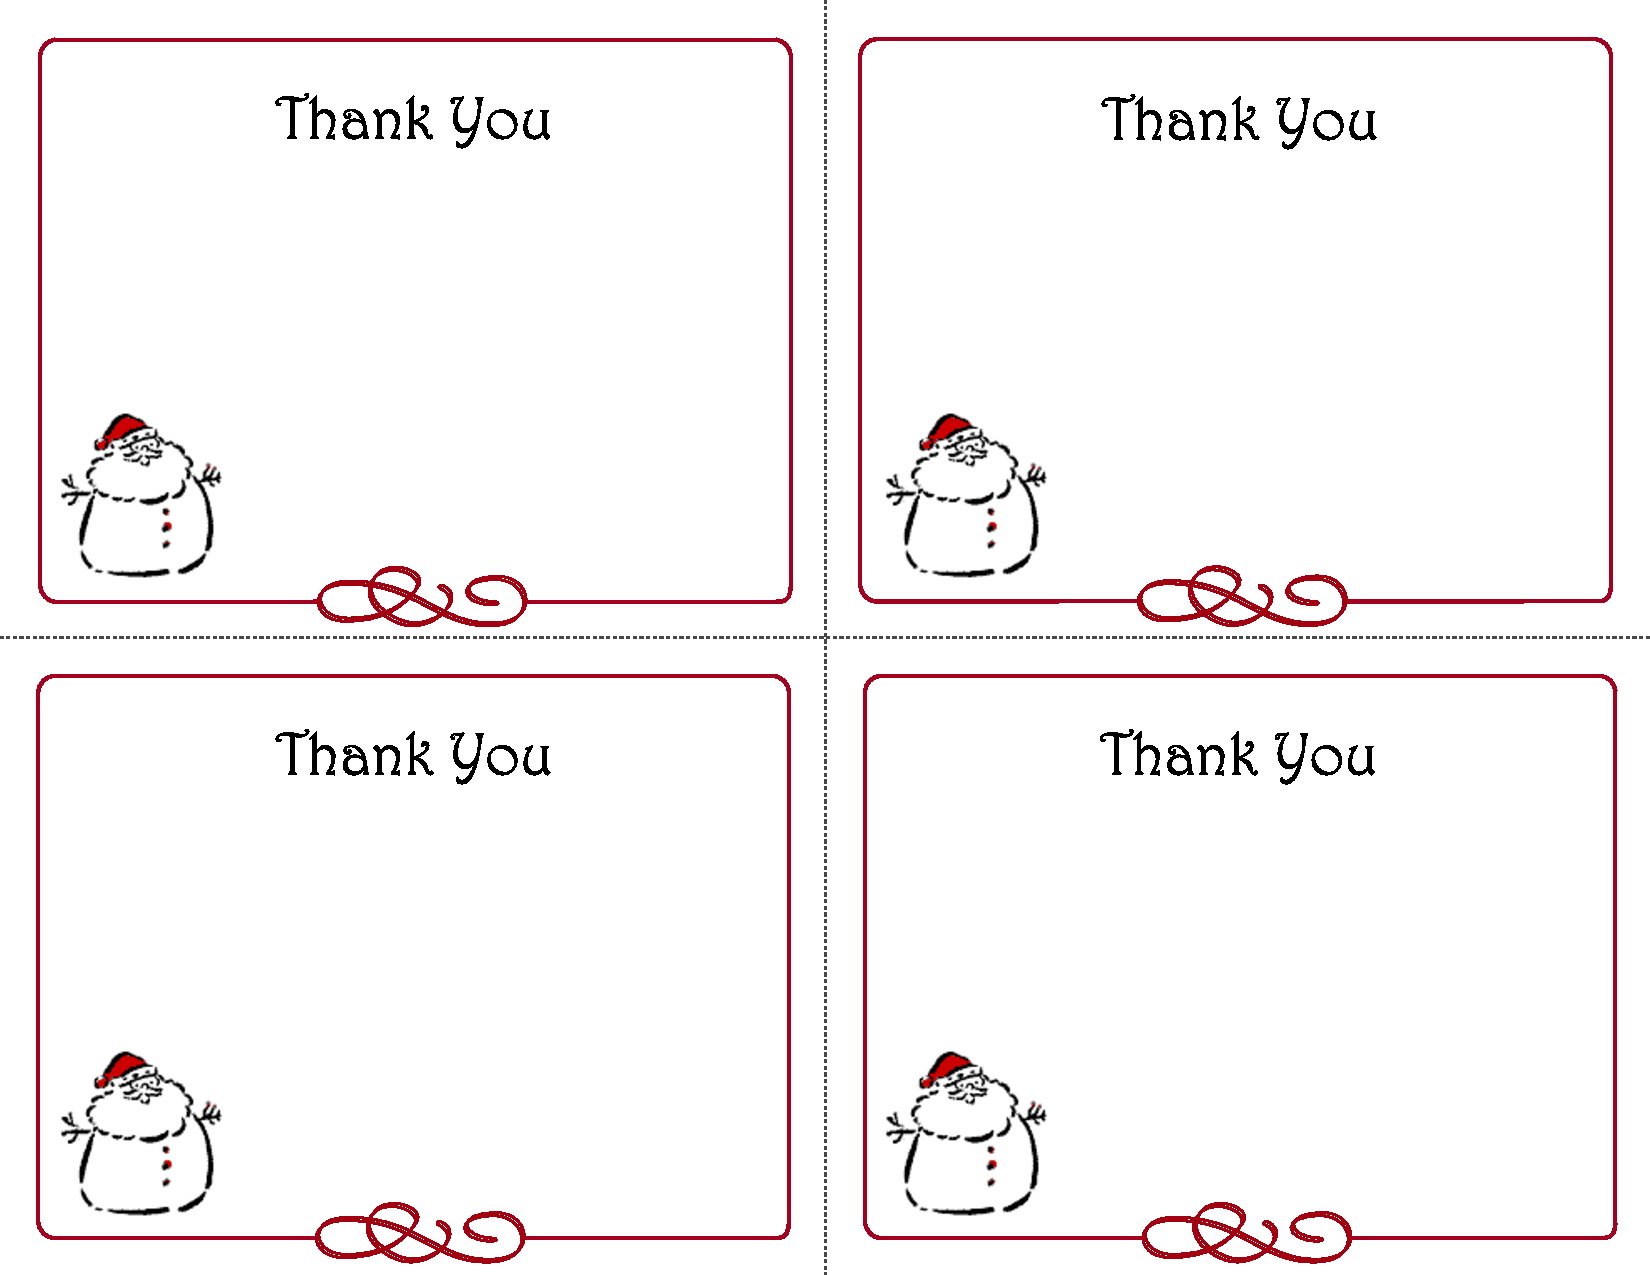 Free Thank You Cards Printable | Free Printable Holiday Gift Throughout Template For Cards To Print Free